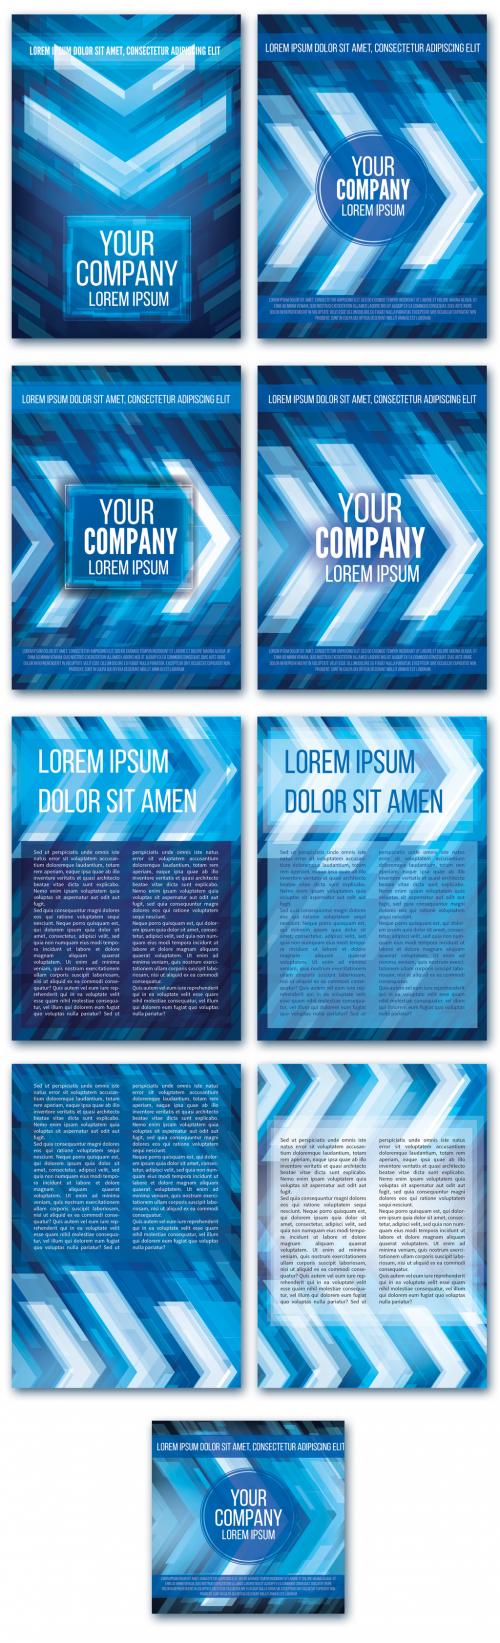 Flyer Layout with Abstract Background 1 - 155164176